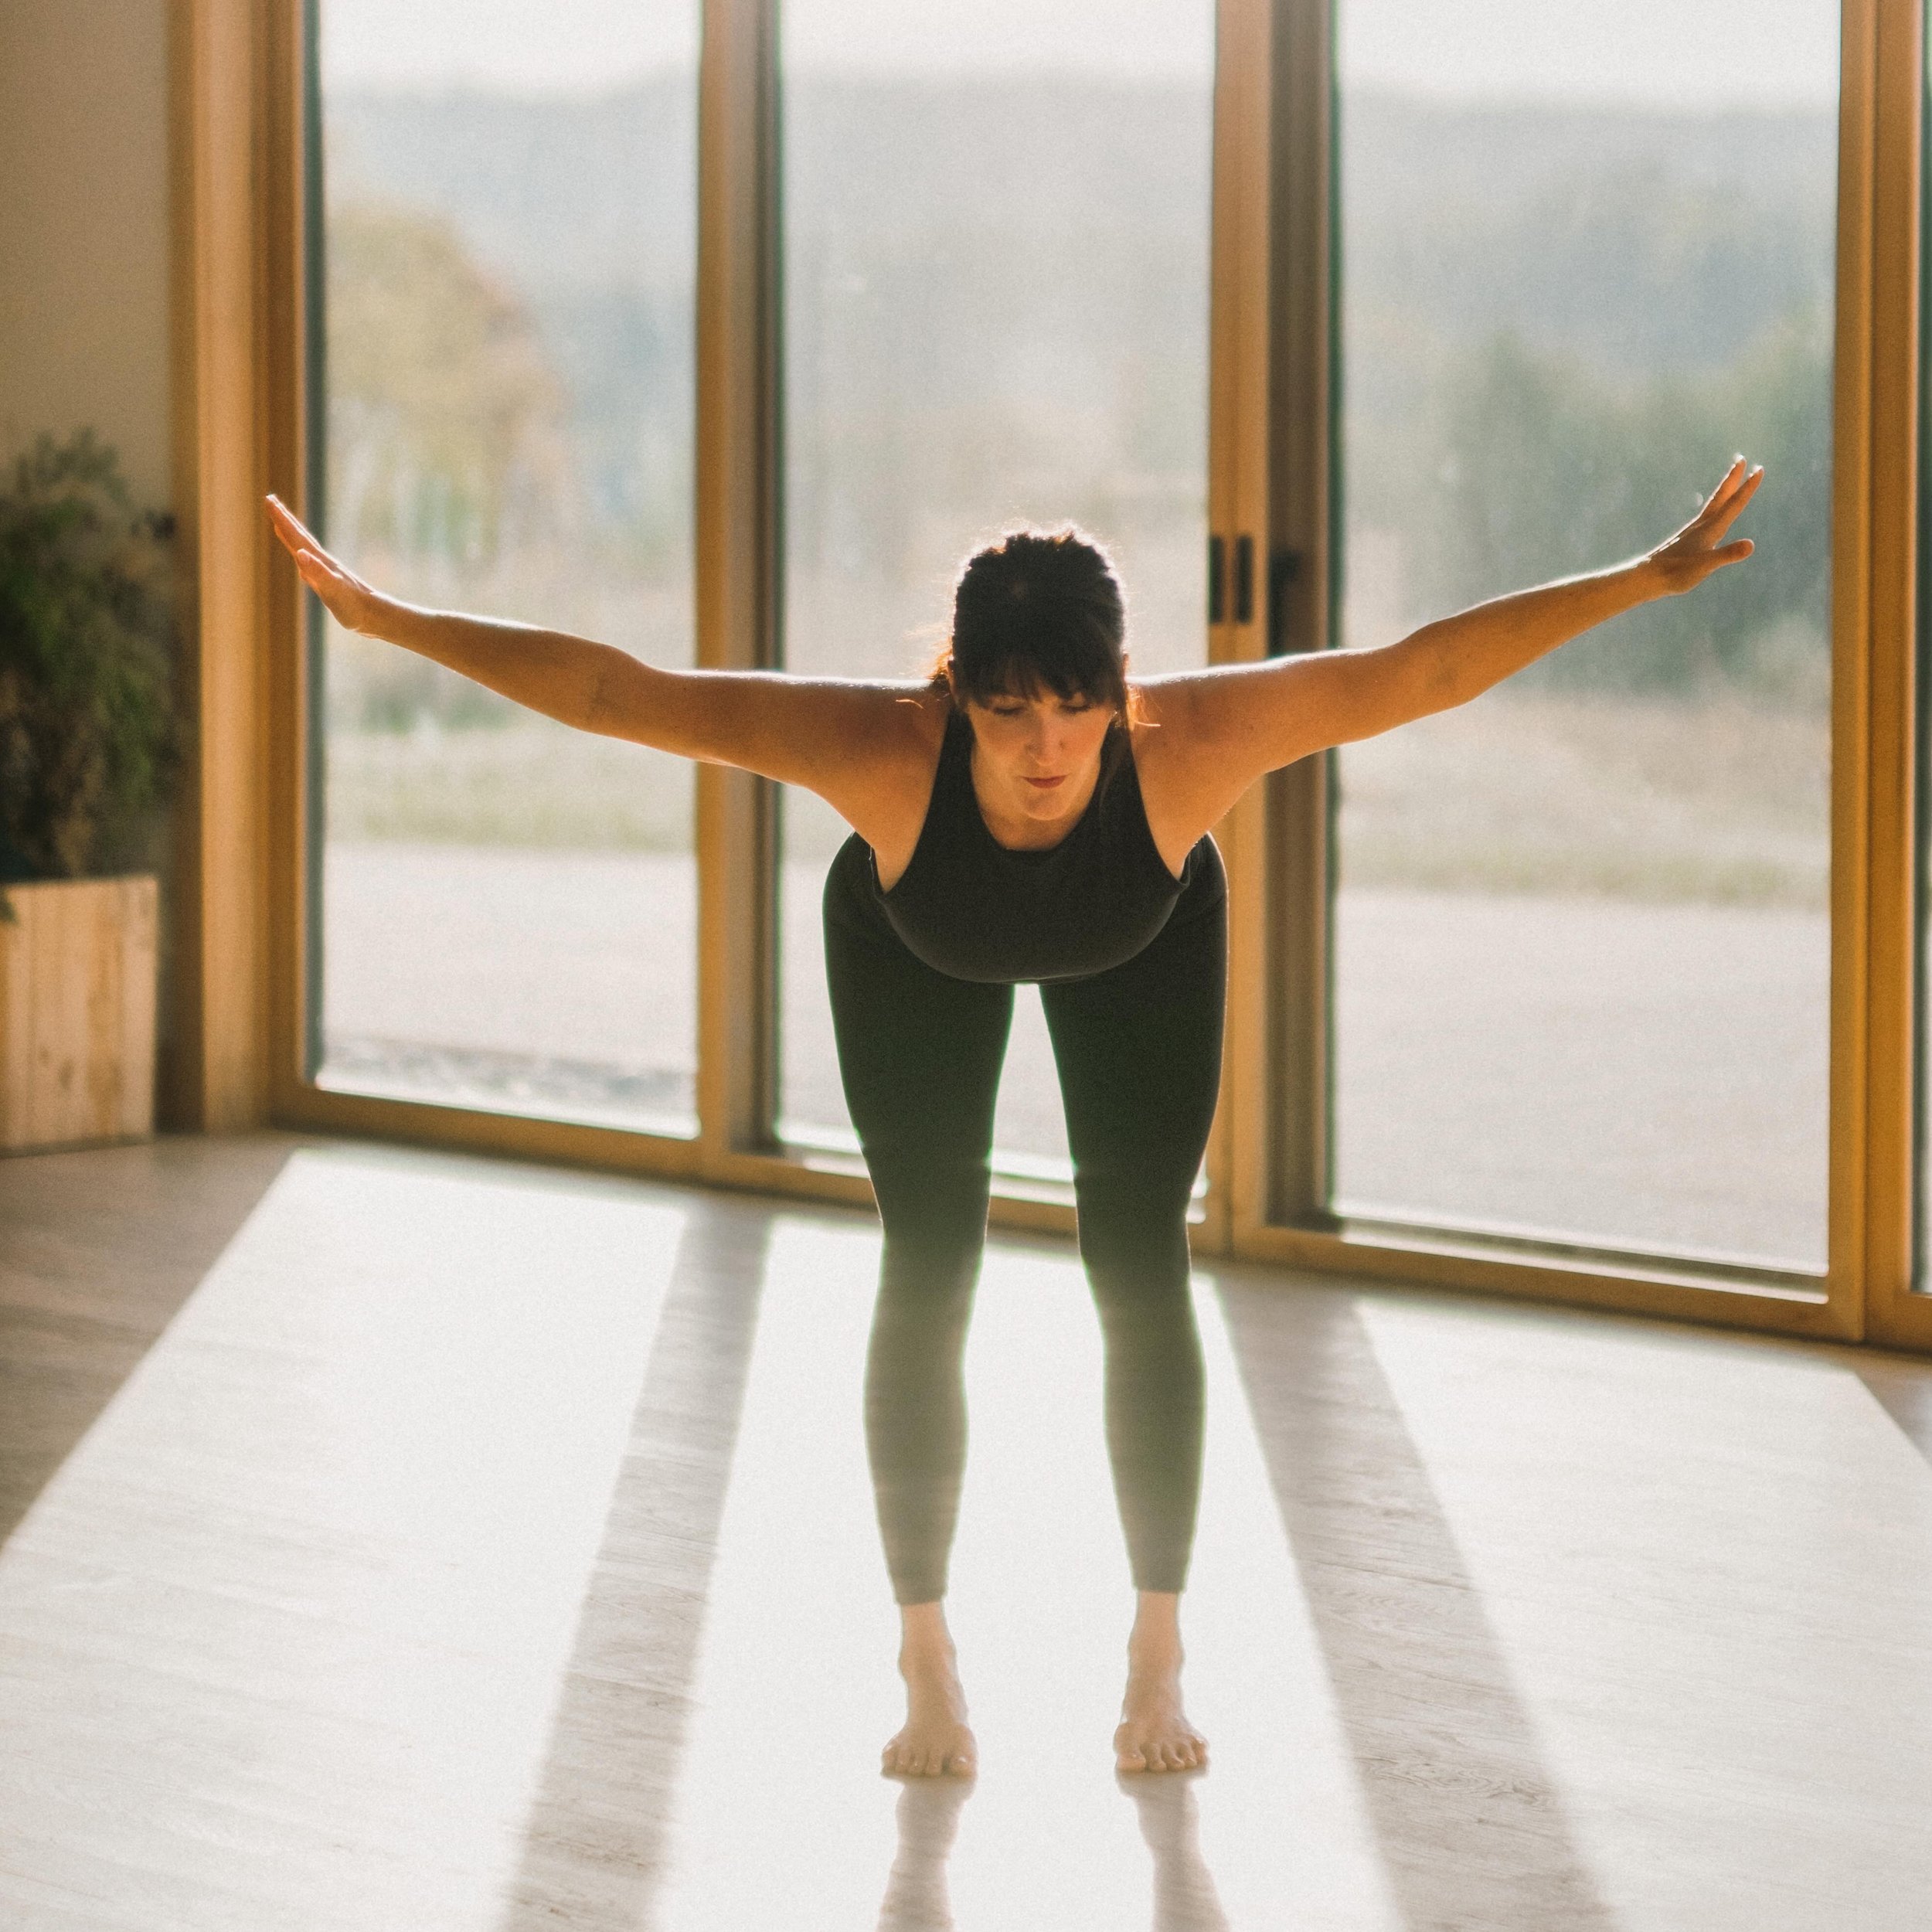 One of the first things we do in a sun salutation is fold forward. Something we continue to do many, many times in a yoga class in several different postures. So what elements make up a forward fold? What should you think about to take care of your b